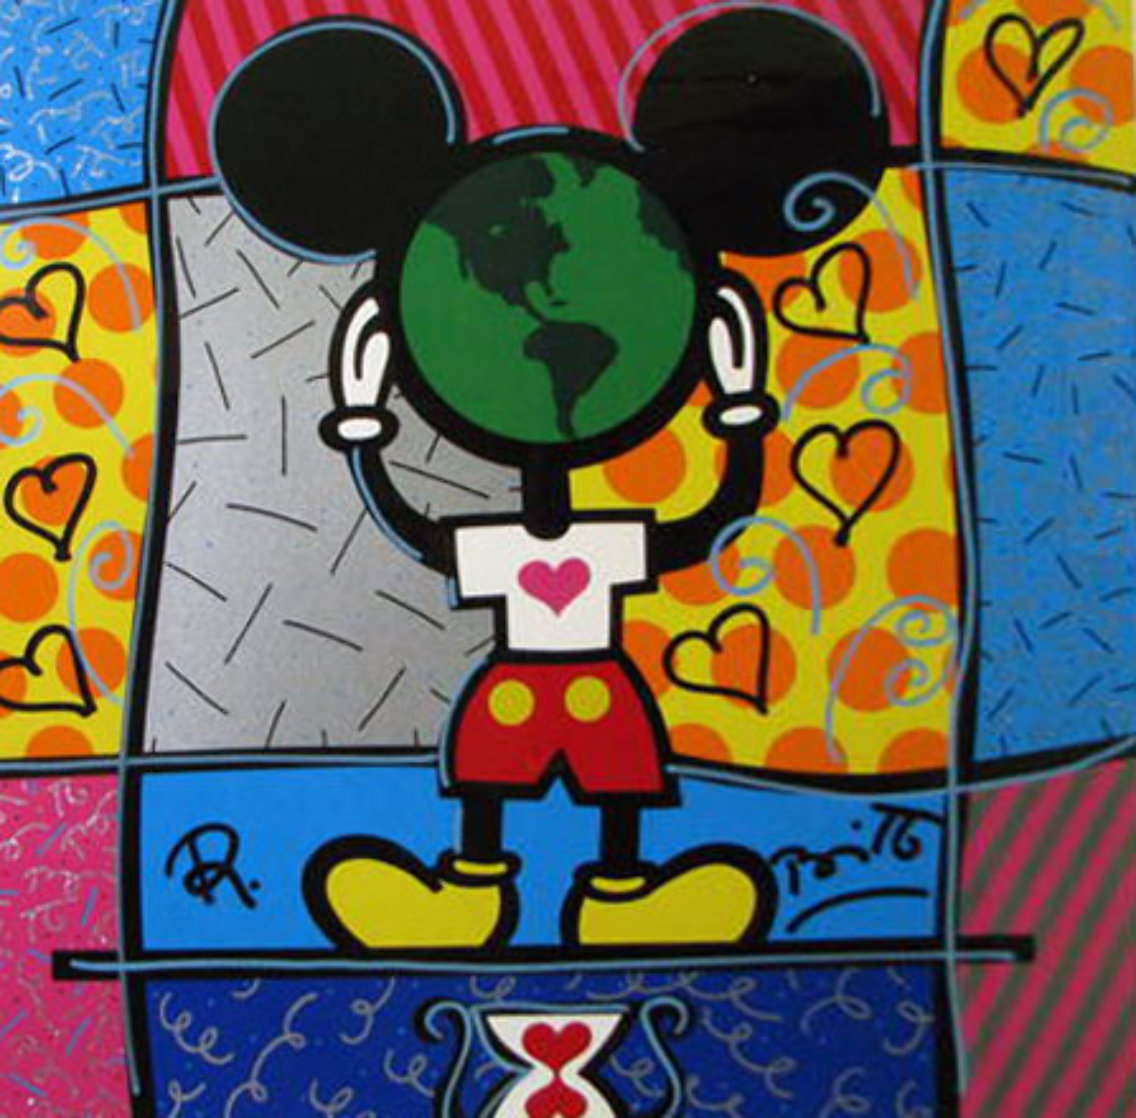 Mickey's  World 1996 Signed Twice Limited Edition Print by Romero Britto